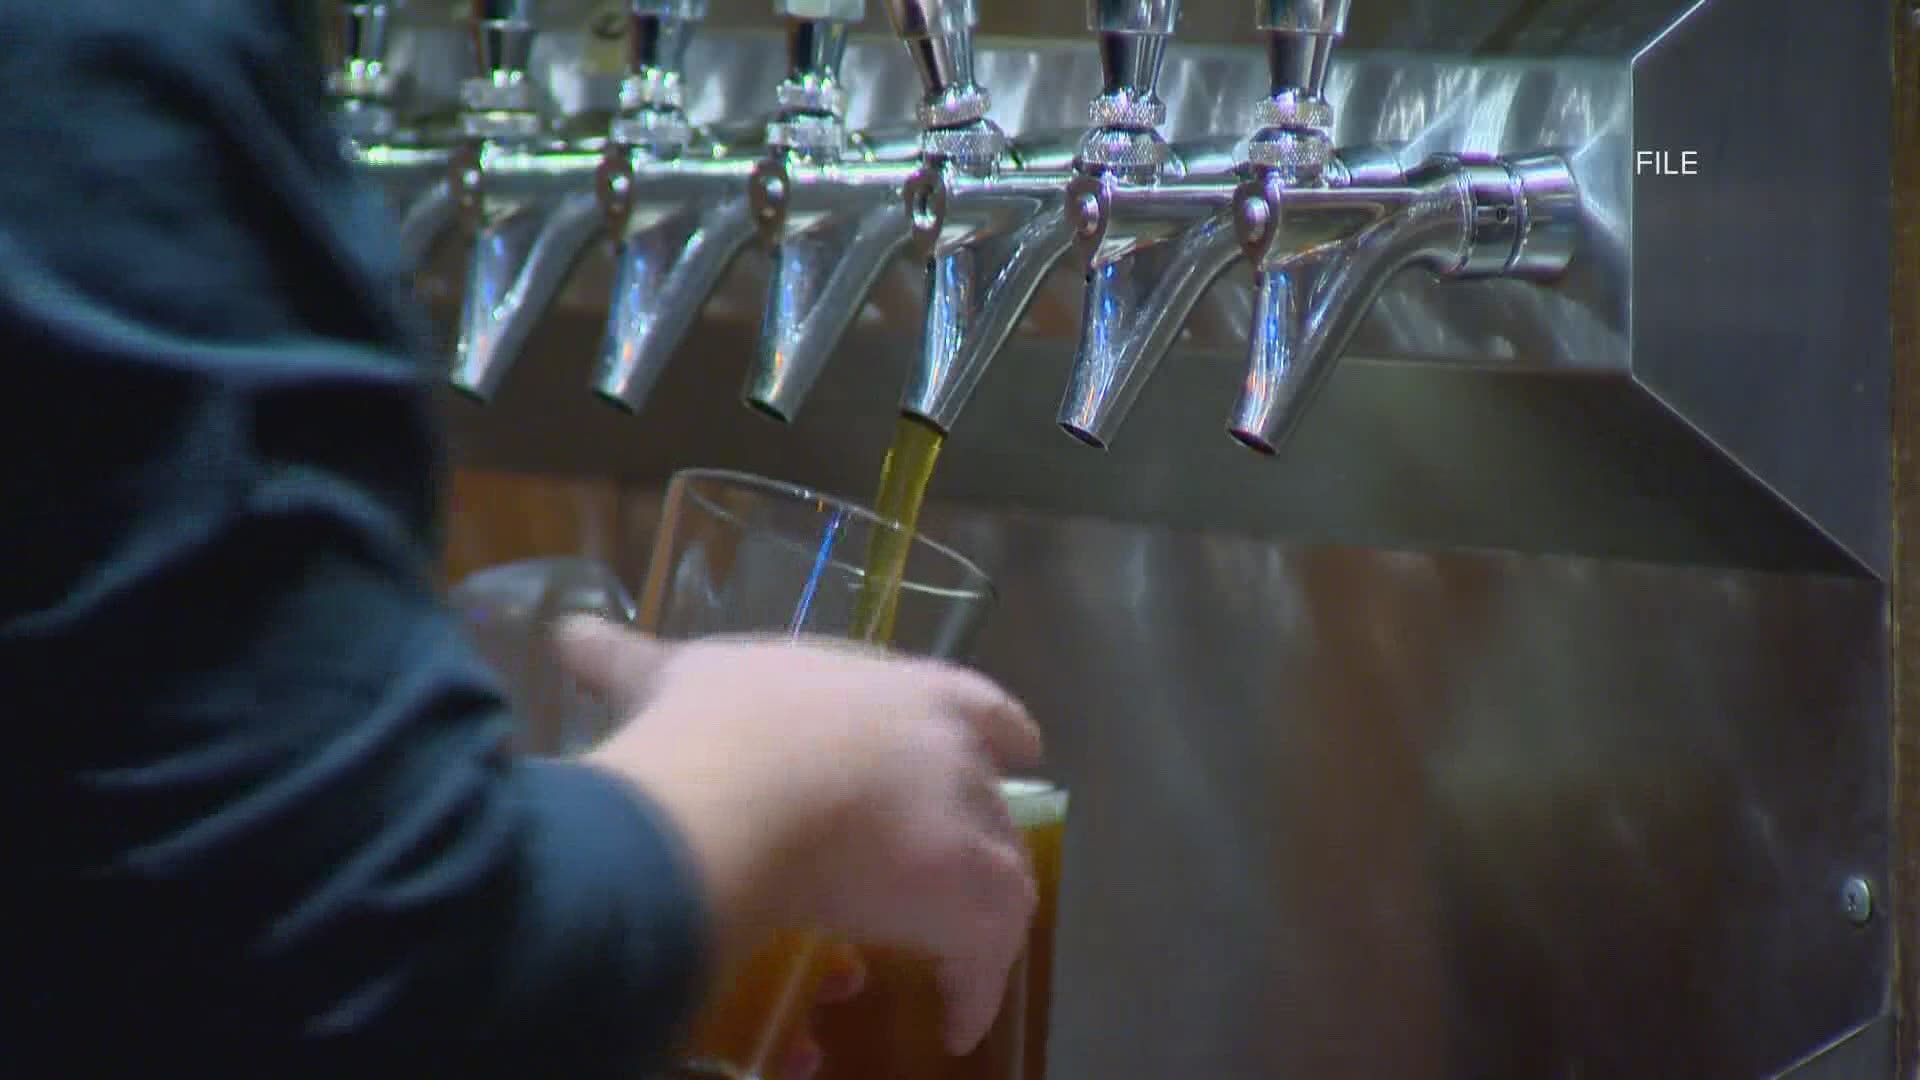 An Act that was signed in 2017 that reduced certain taxes for Maine breweries is set to expire next month, potentially doubling those taxes.